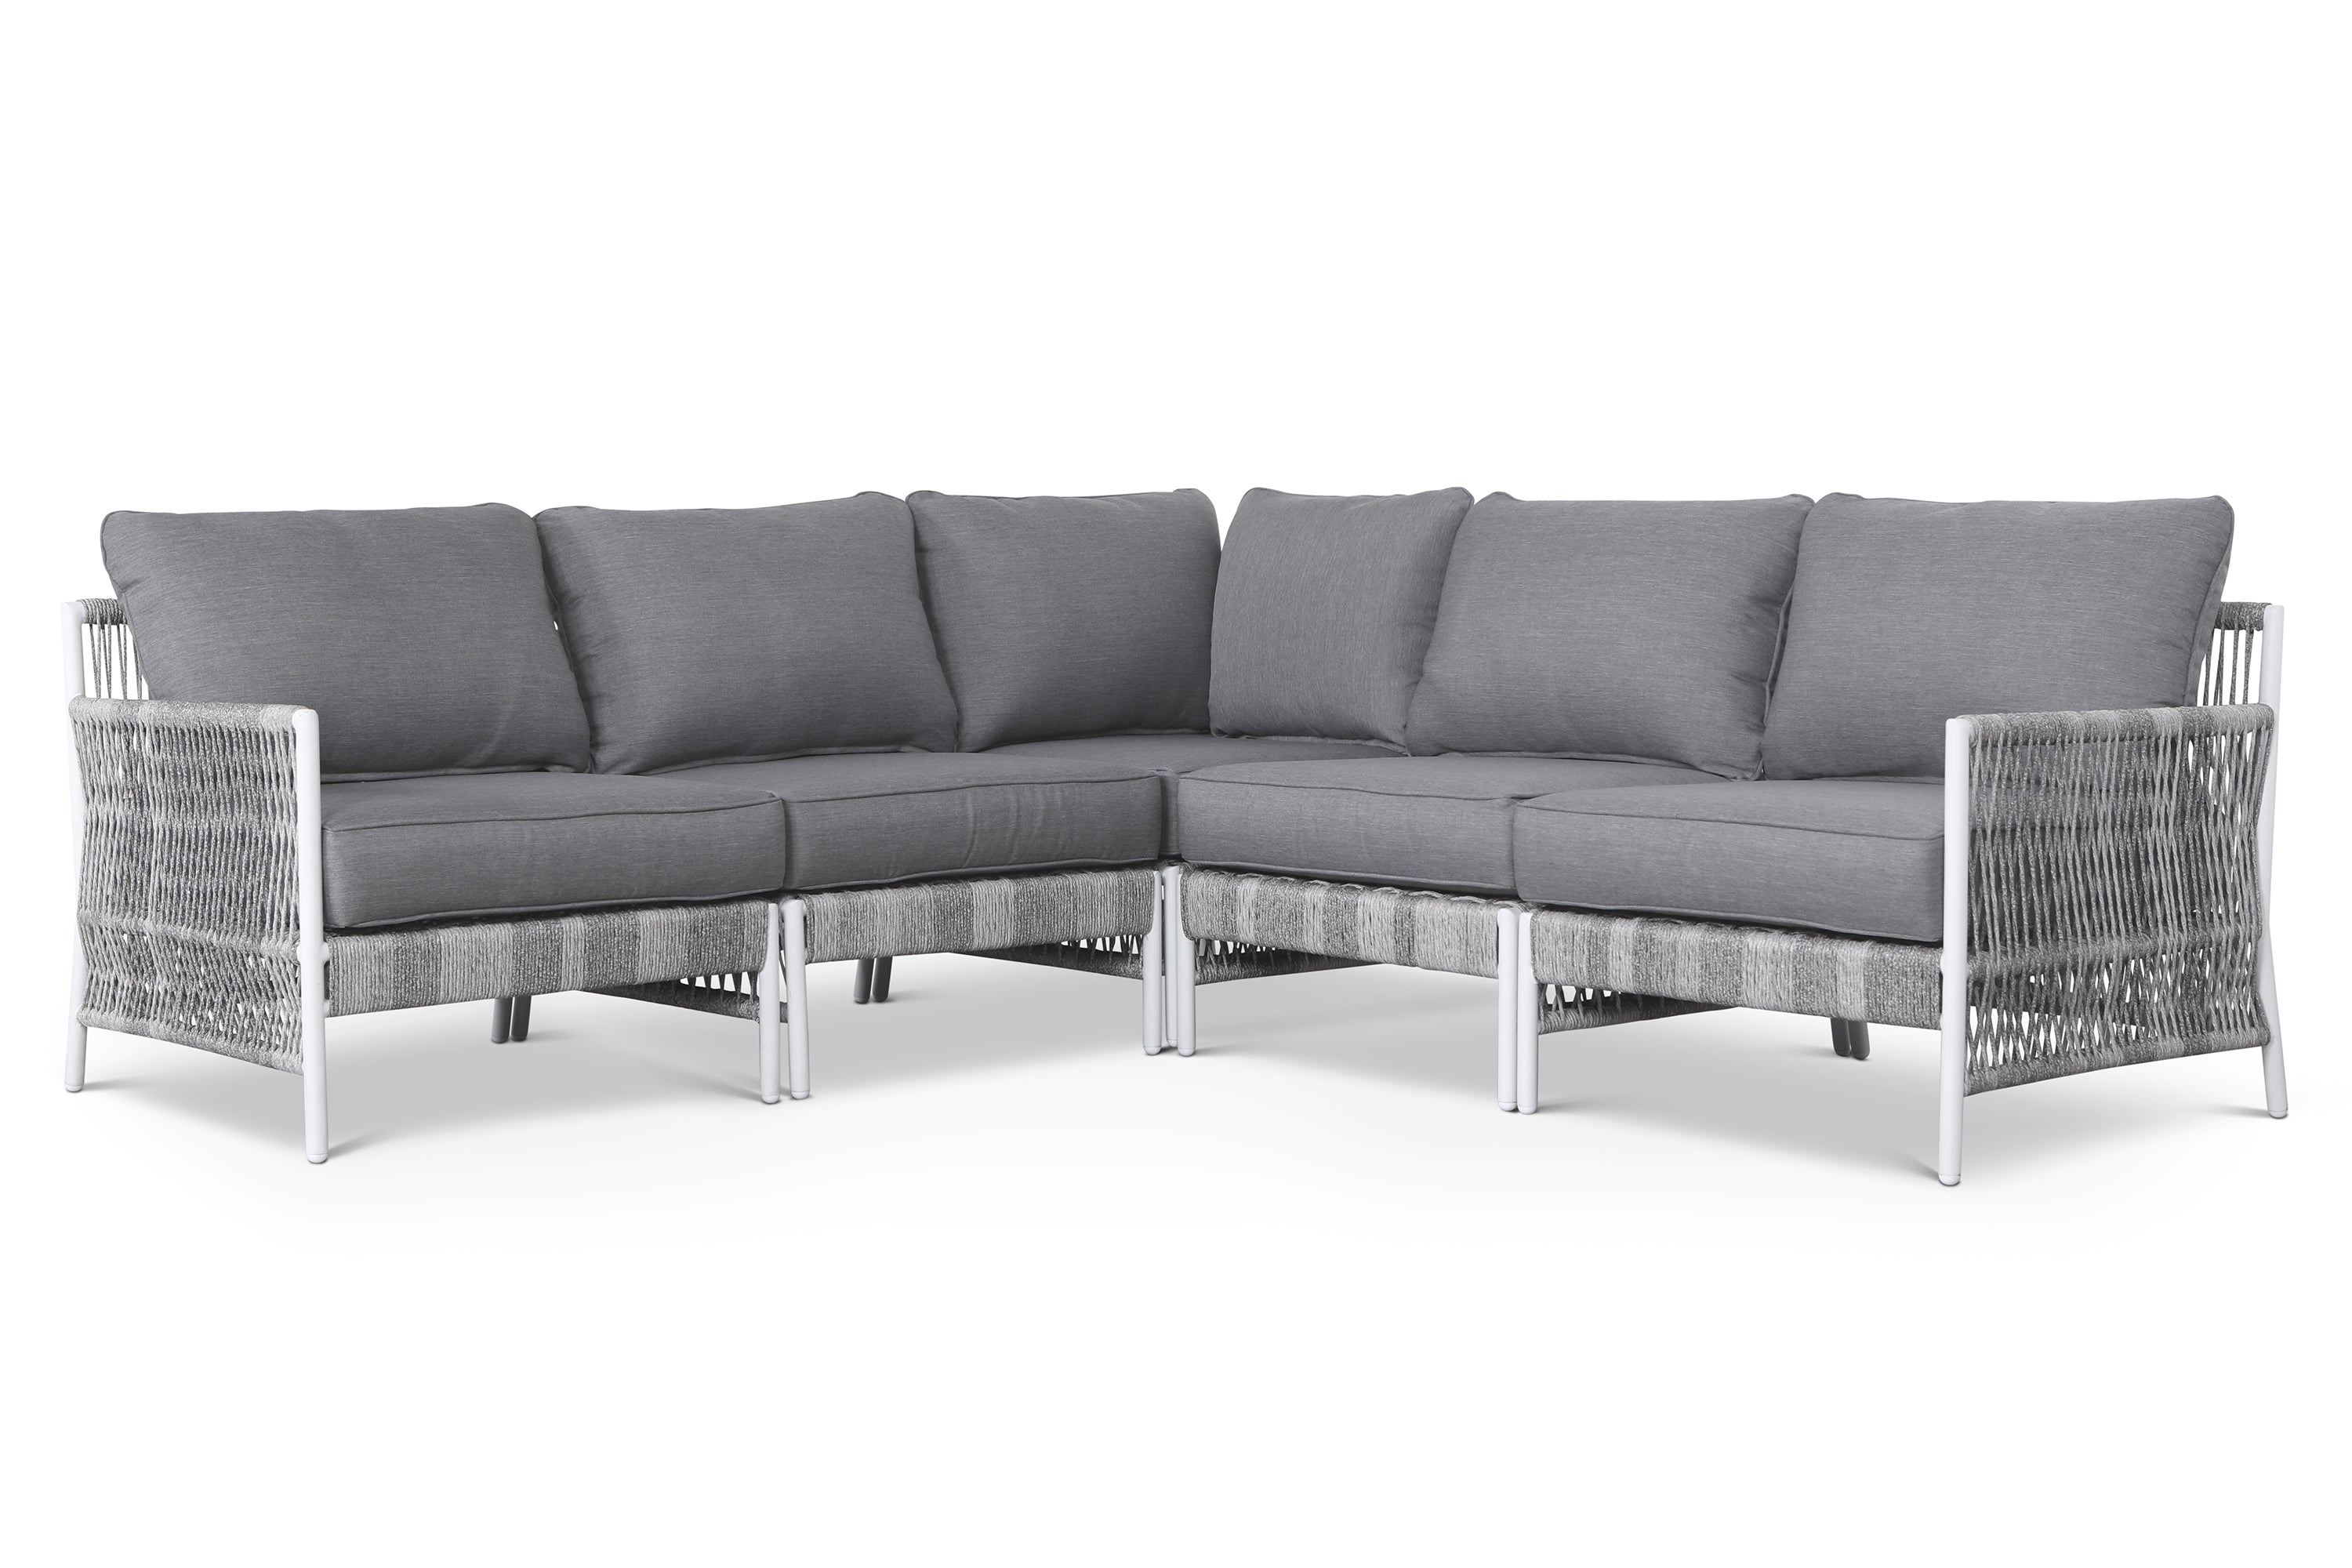 Olivia Grey 5 Piece Outdoor Roped Wicker Sectional